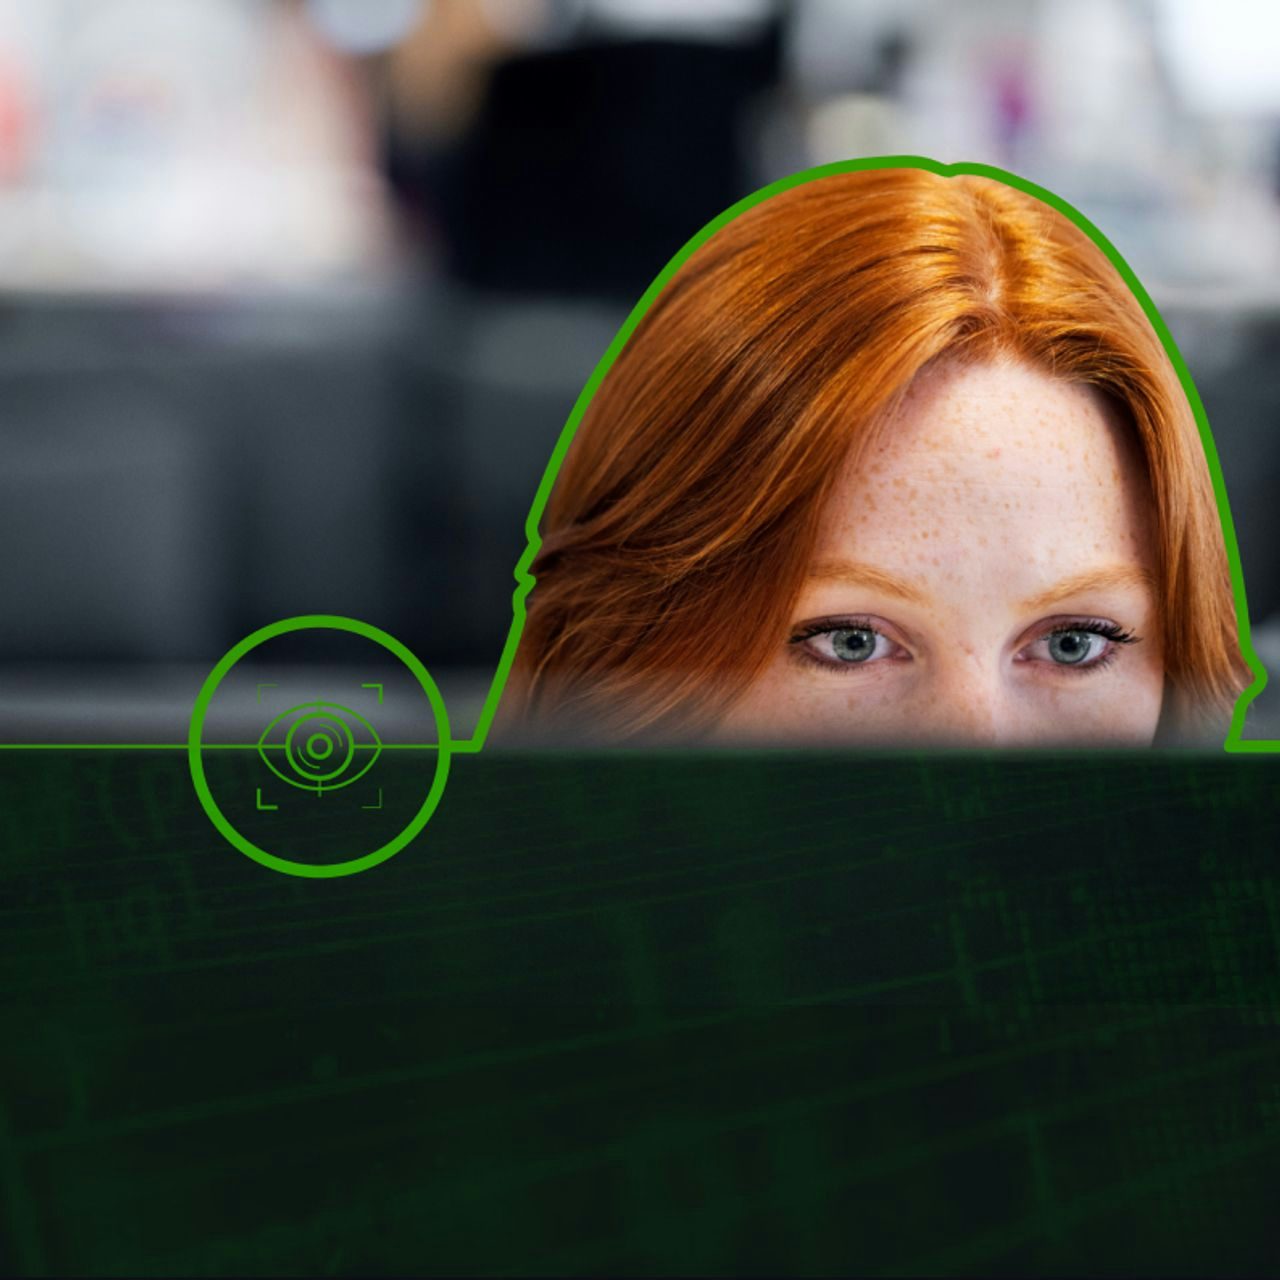 A focused woman with red hair peeking over a computer monitor, with a graphical overlay representing cyber security.